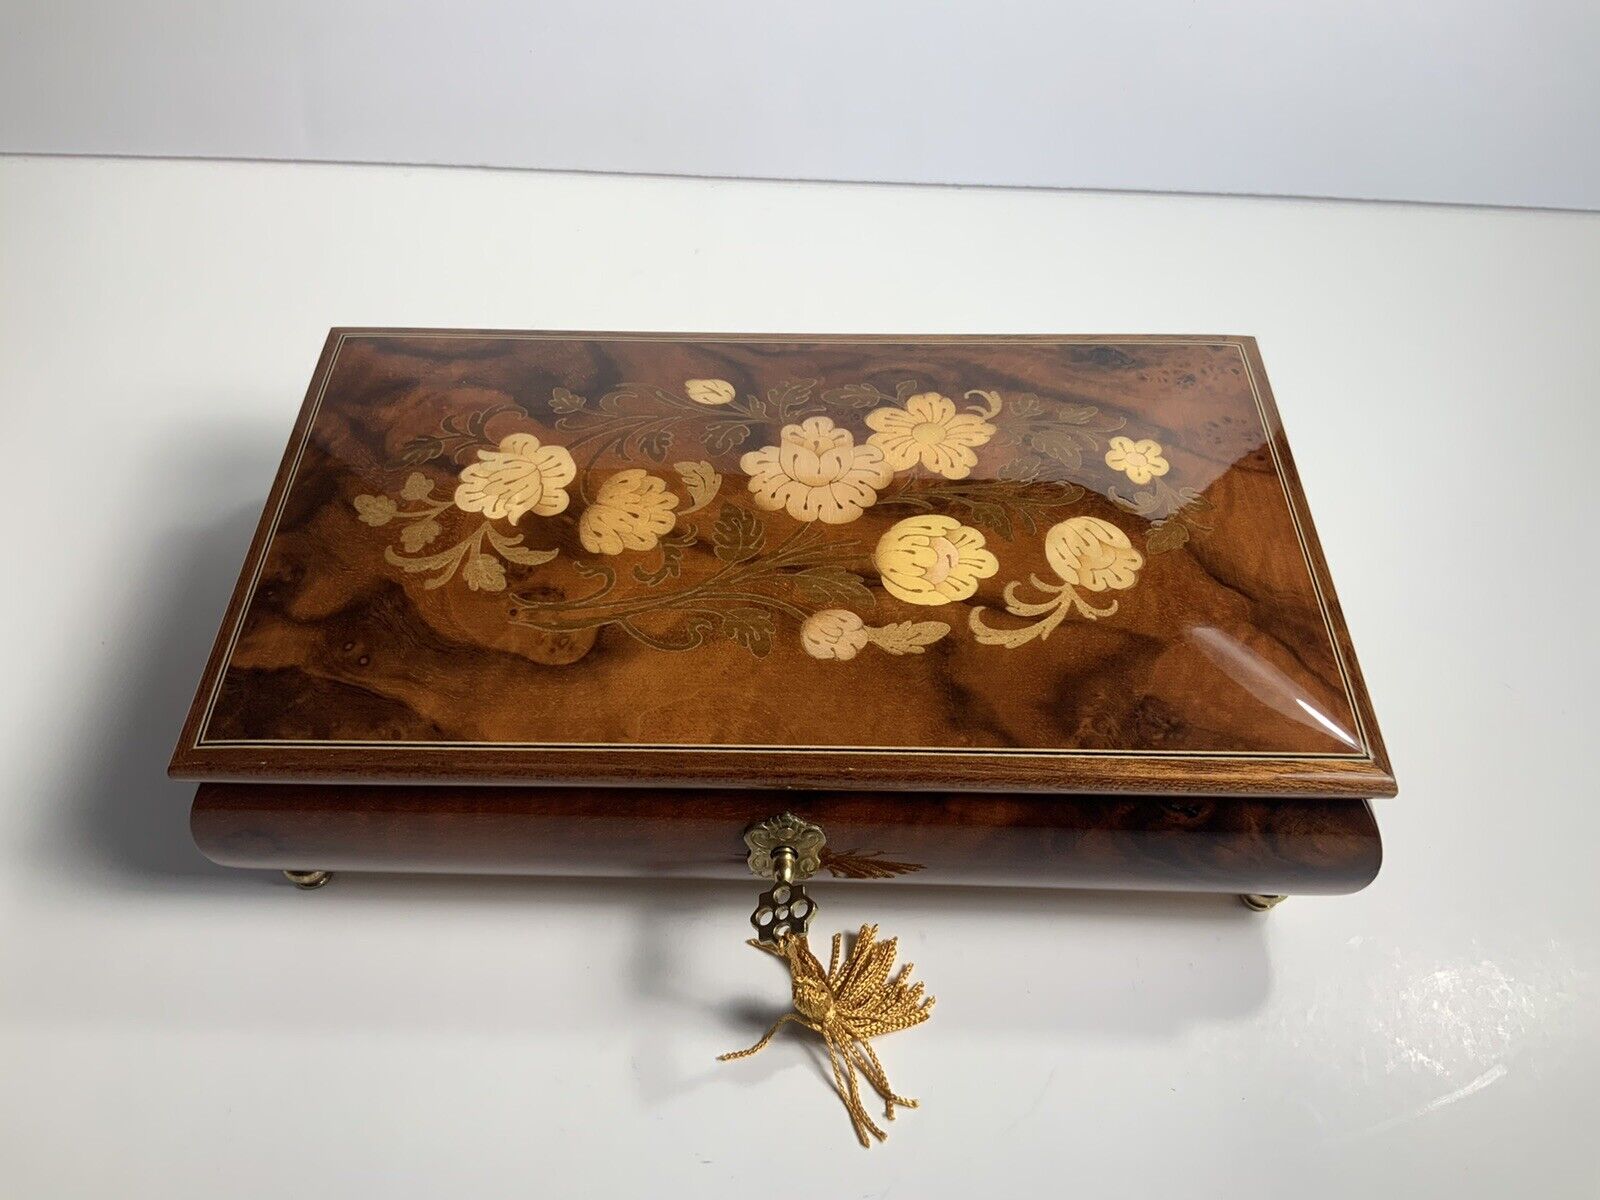 Vintage Wooden Inlaid Music Box with Key Made In Italy Torna A Sorrento Floral